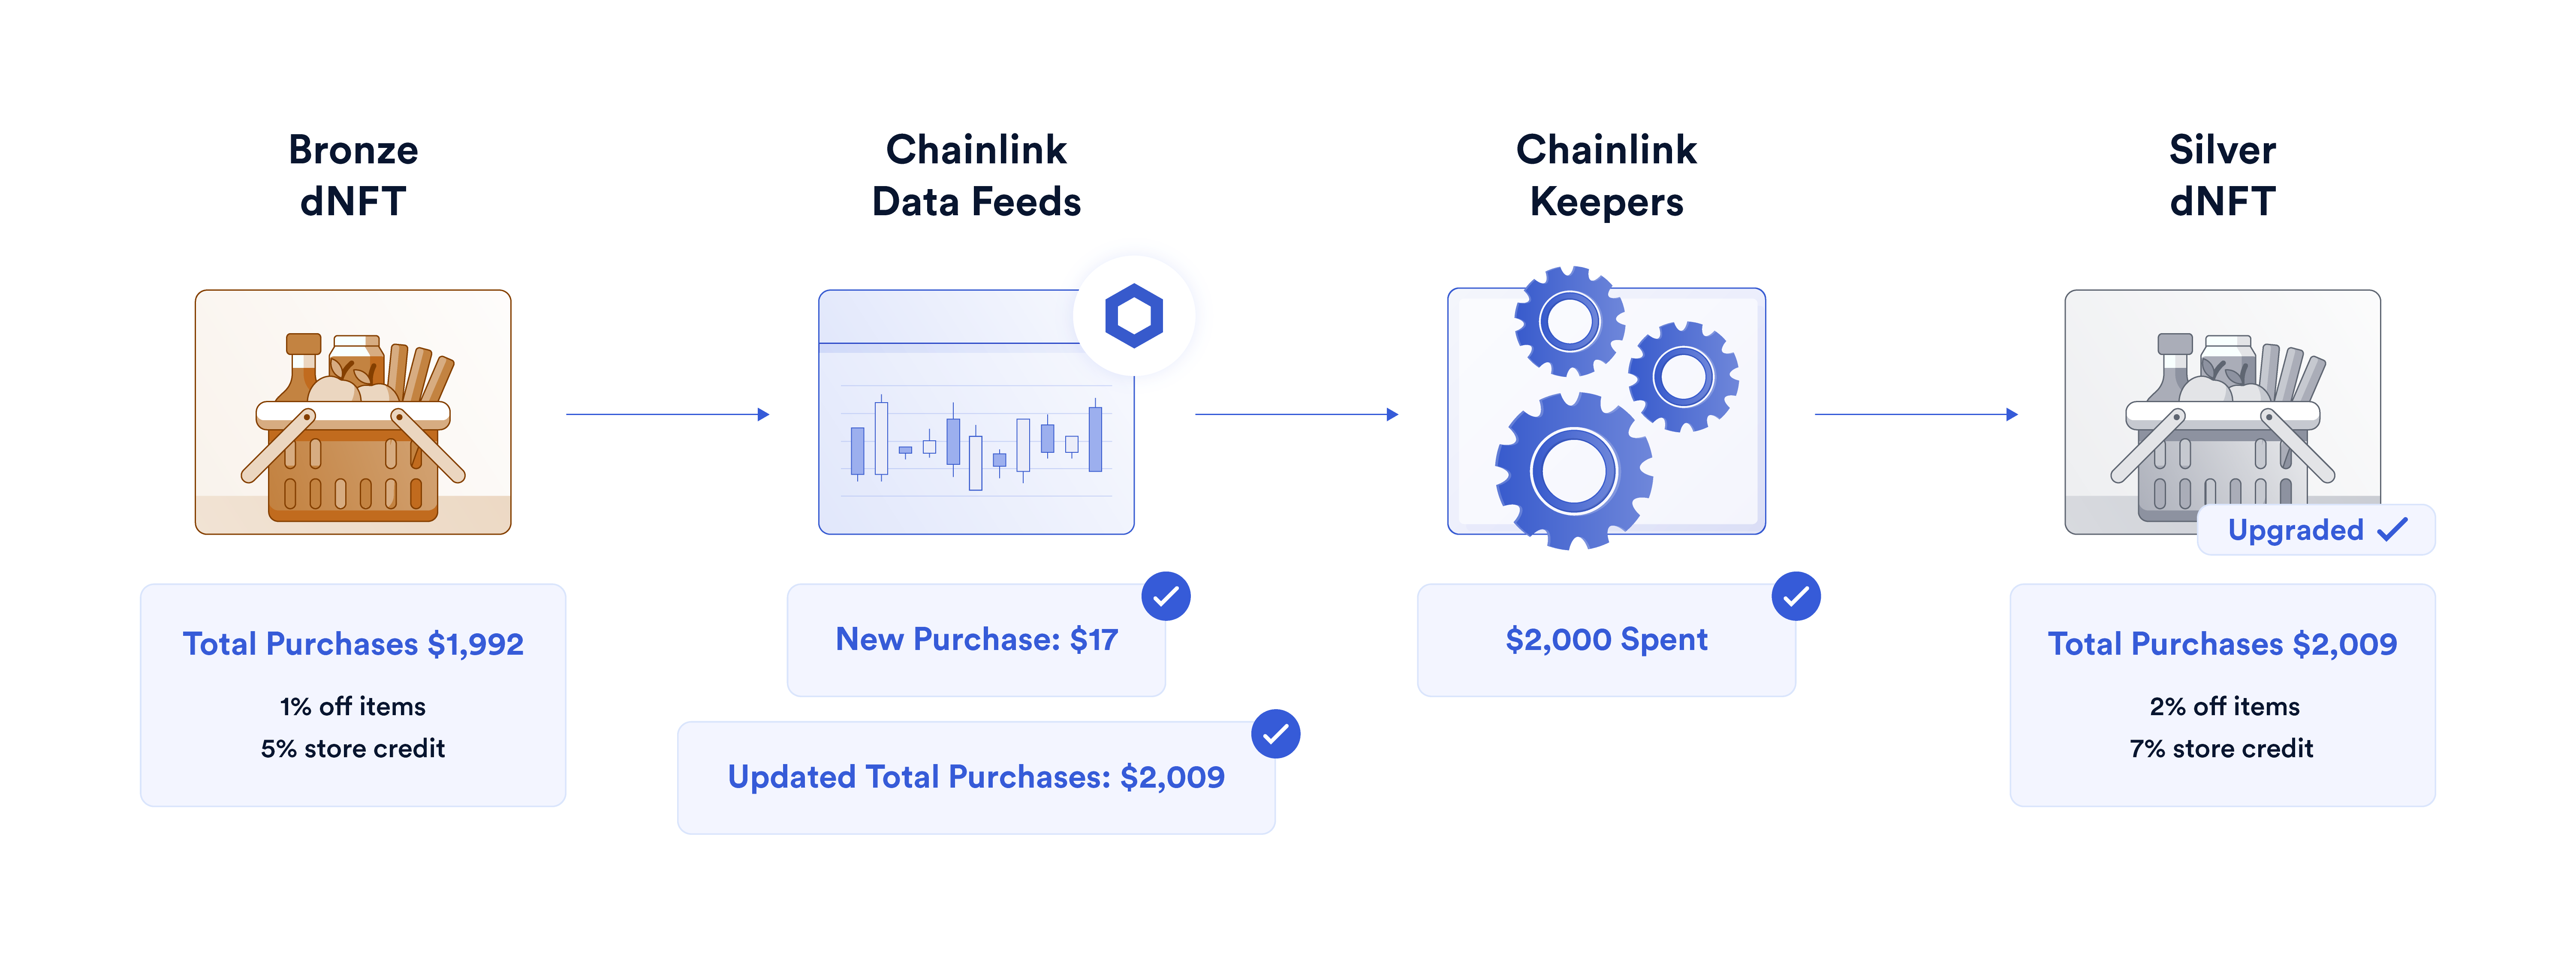 A diagram showing a hypothetical loyalty rewards program that leverages both Chainlink Data Feeds and Keepers.